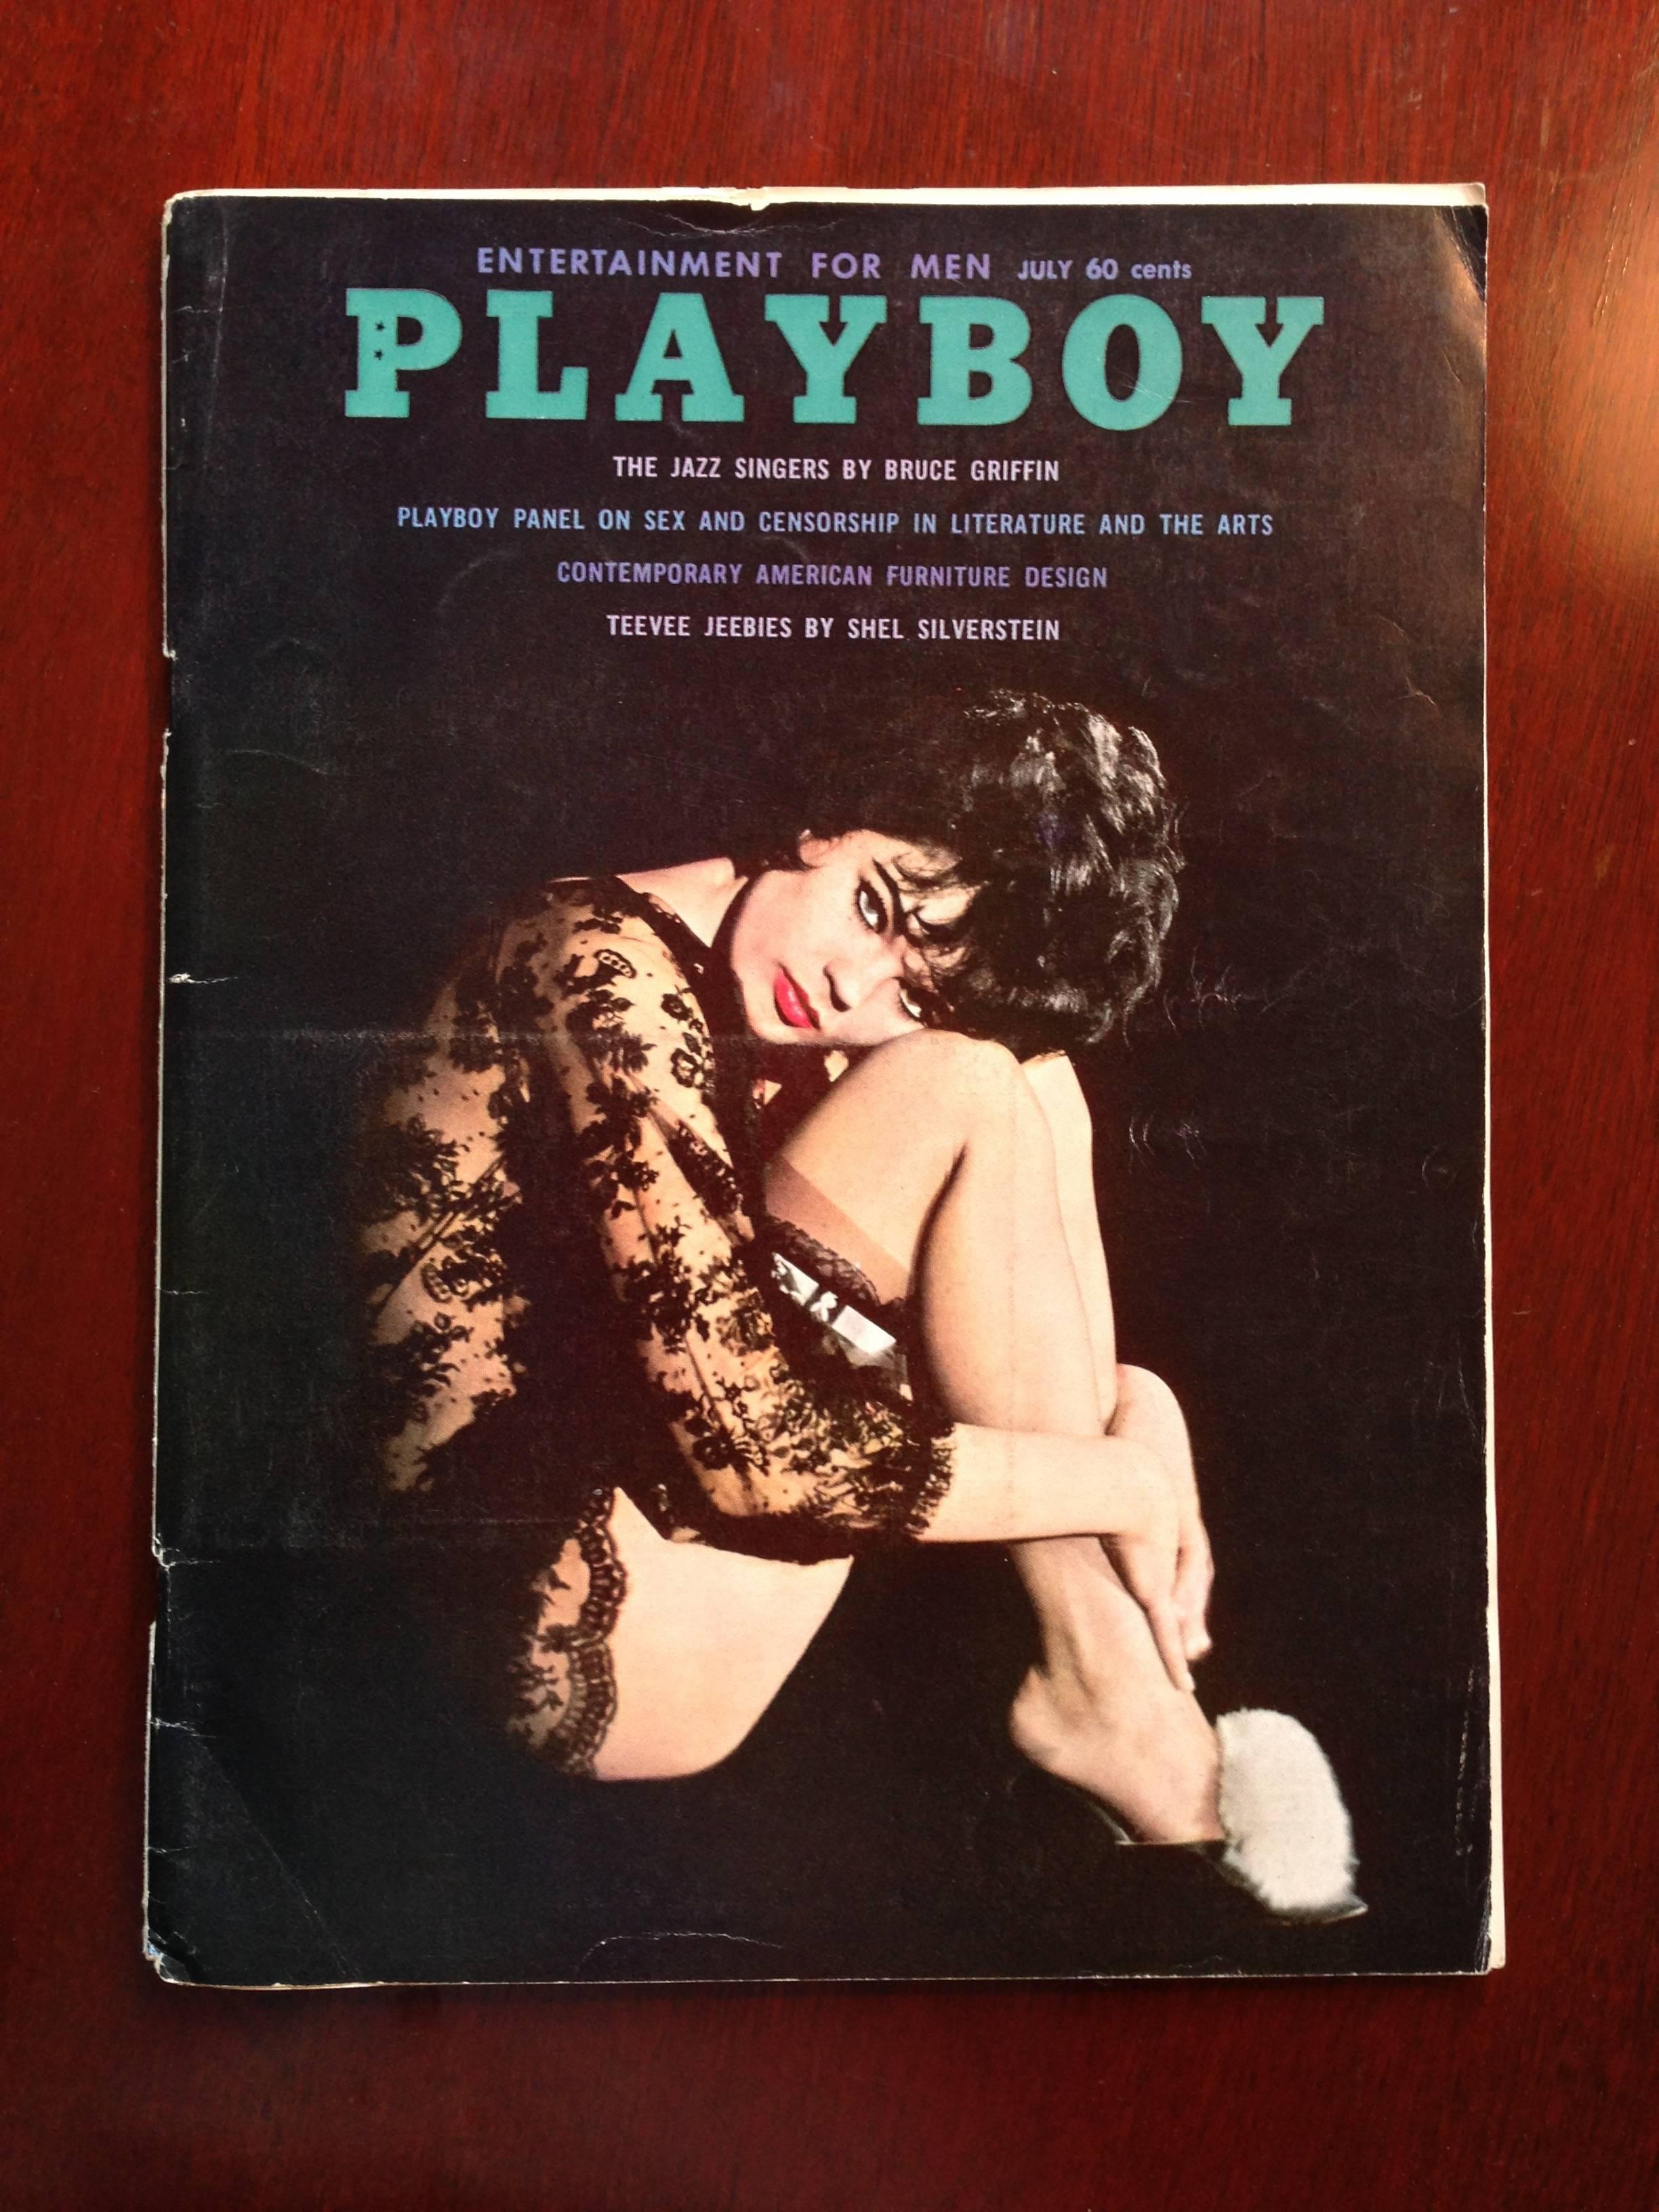 Ever laugh when someone said, “I only read Playboy for the articles”? You won’t anymore.

Up for sale is the July 1961 edition of Playboy Magazine. The Centerfold is nice, but the magazine’s real beauty is the spread on the masters of Midcentury